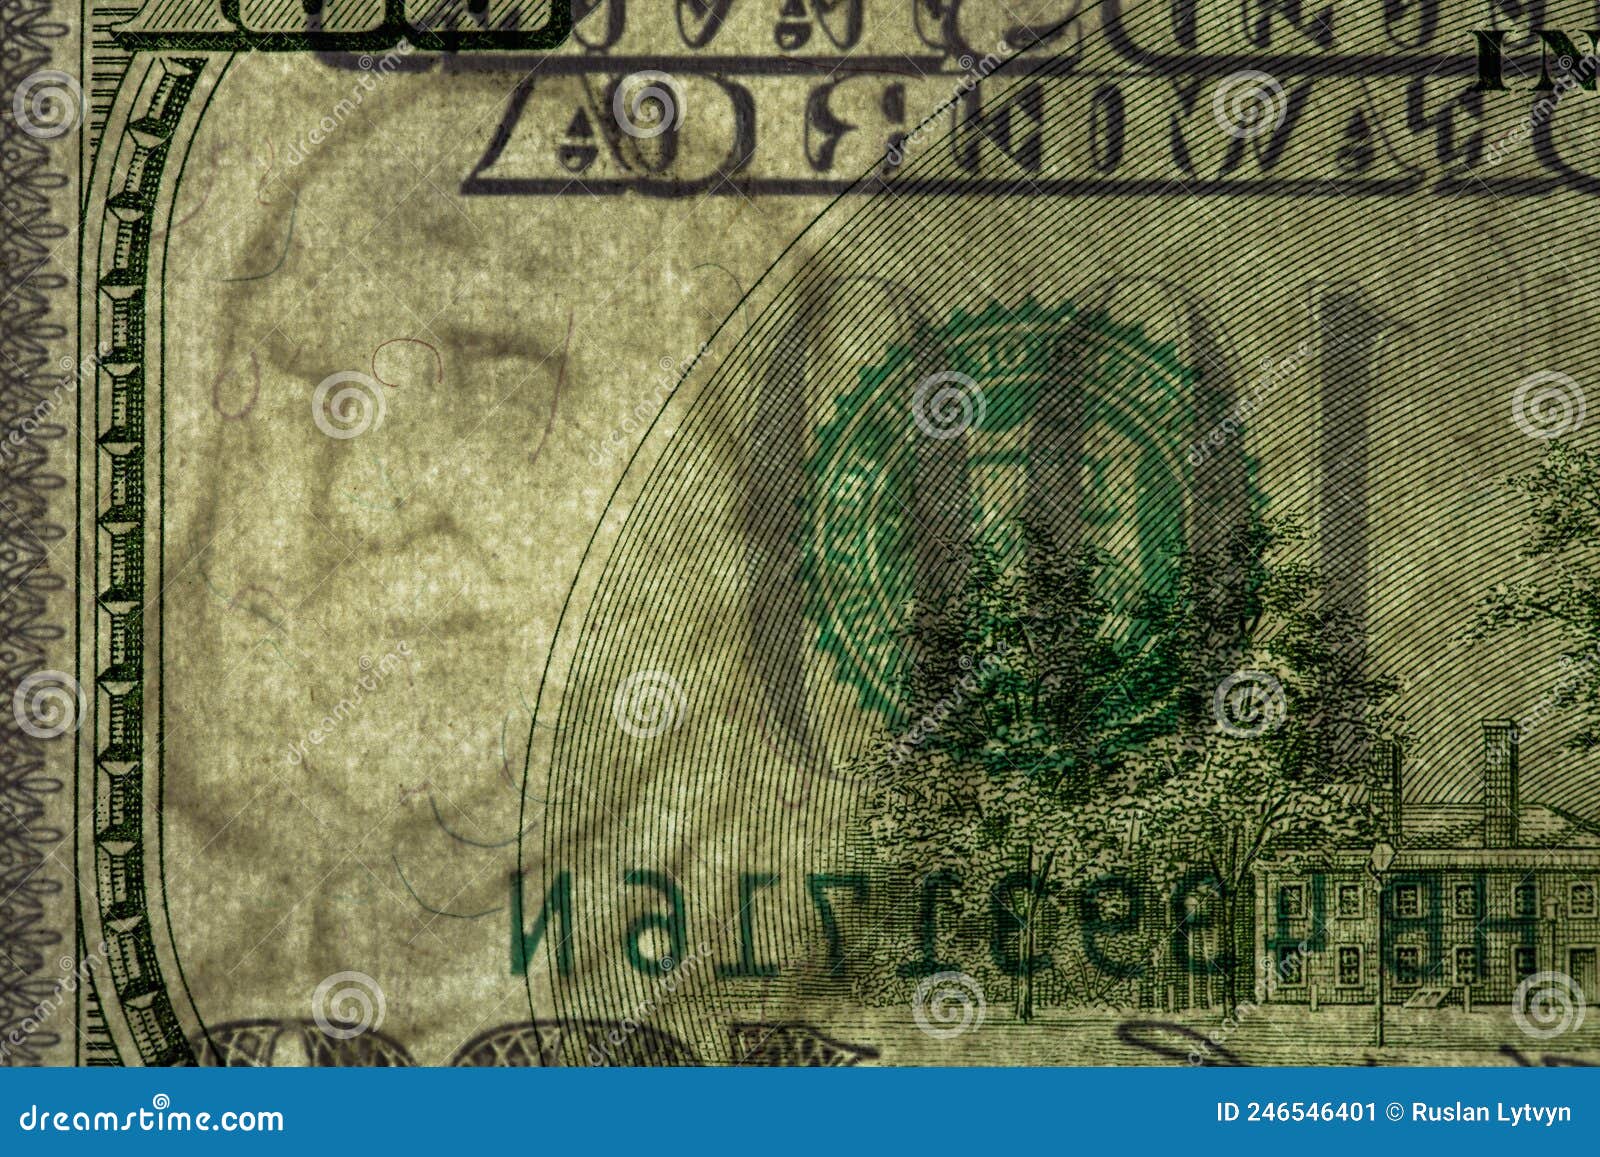 fragment of 100 dollar banknote with visible details of banknote reverse